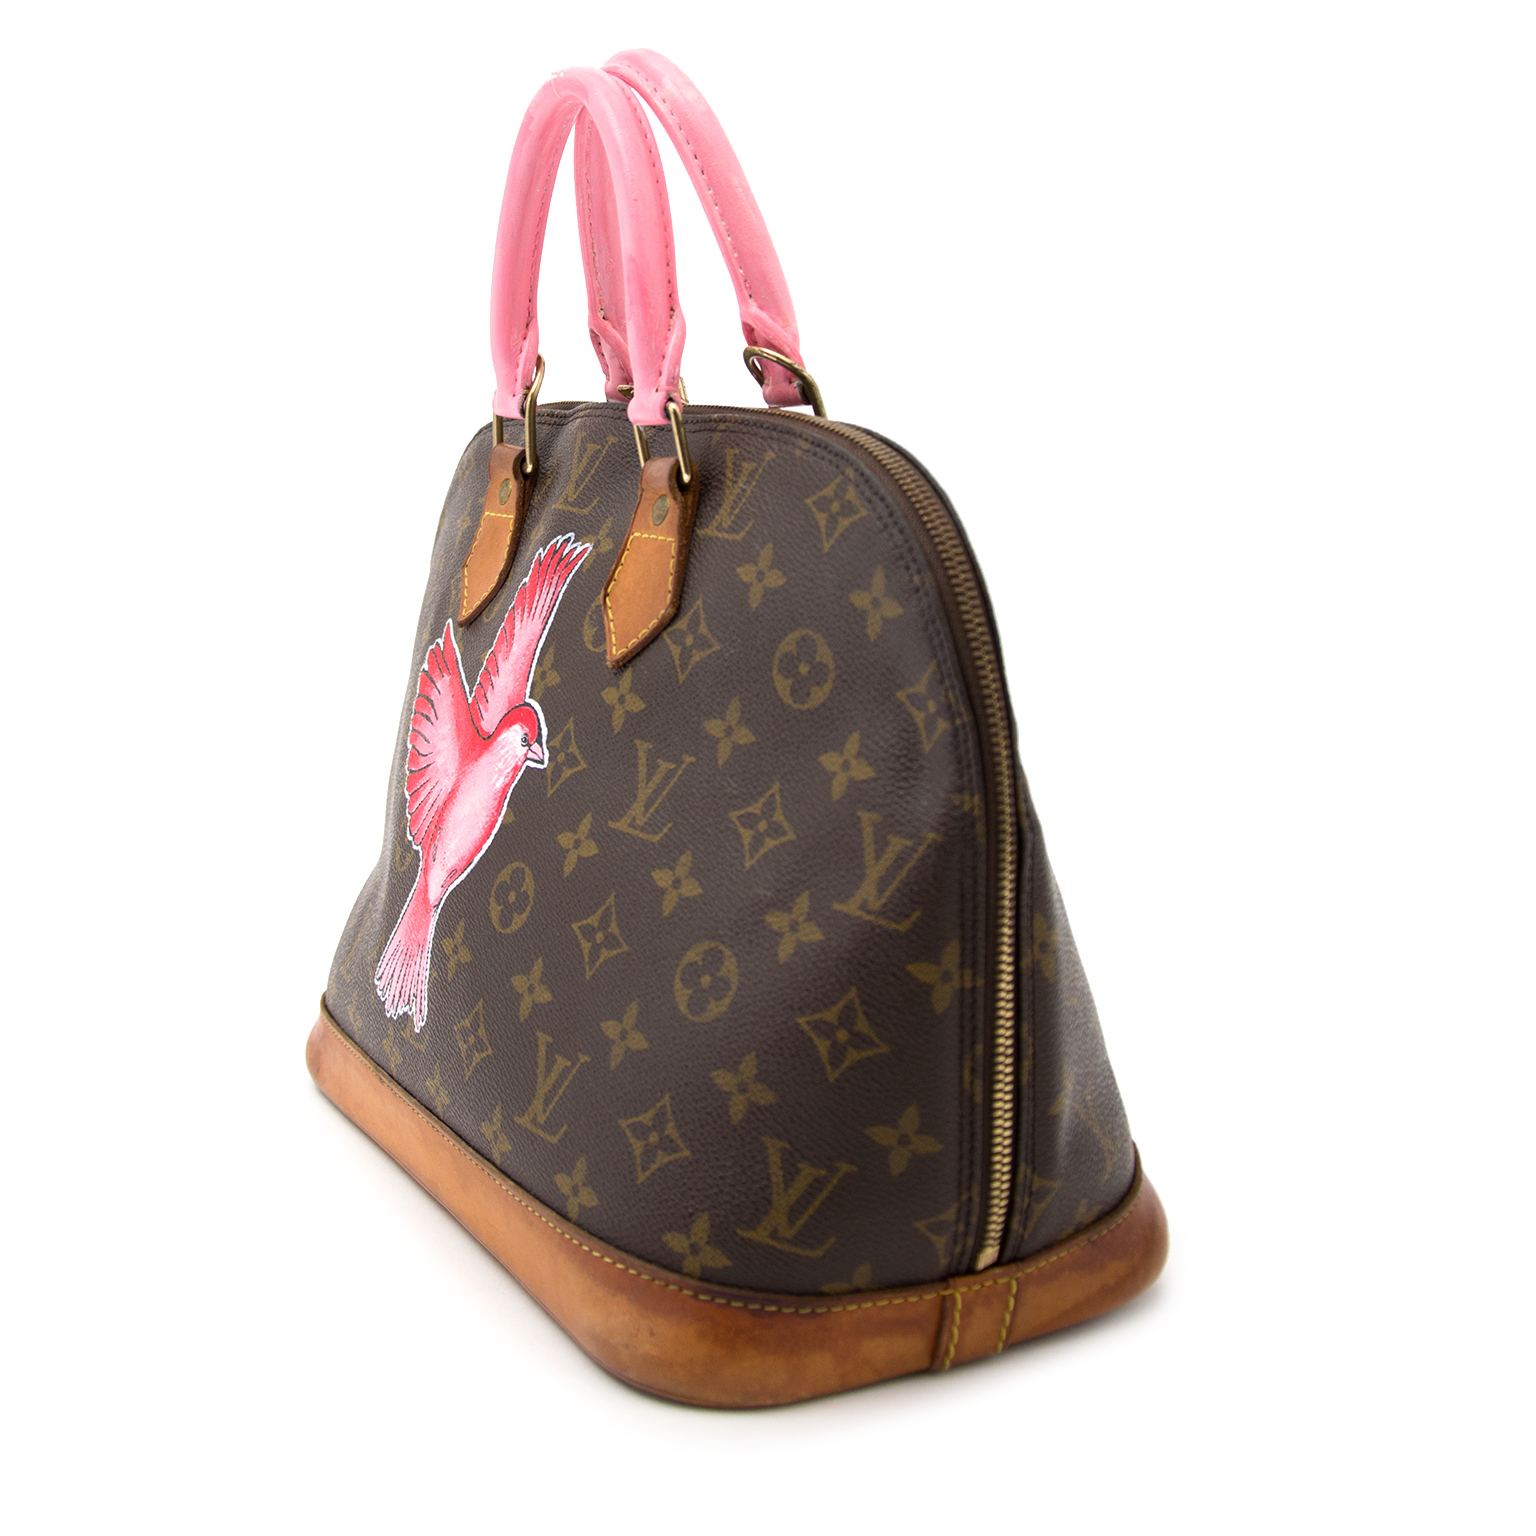 Hand Painted Louis Vuitton Alma Full of Color Artwork Painted on Both Sides